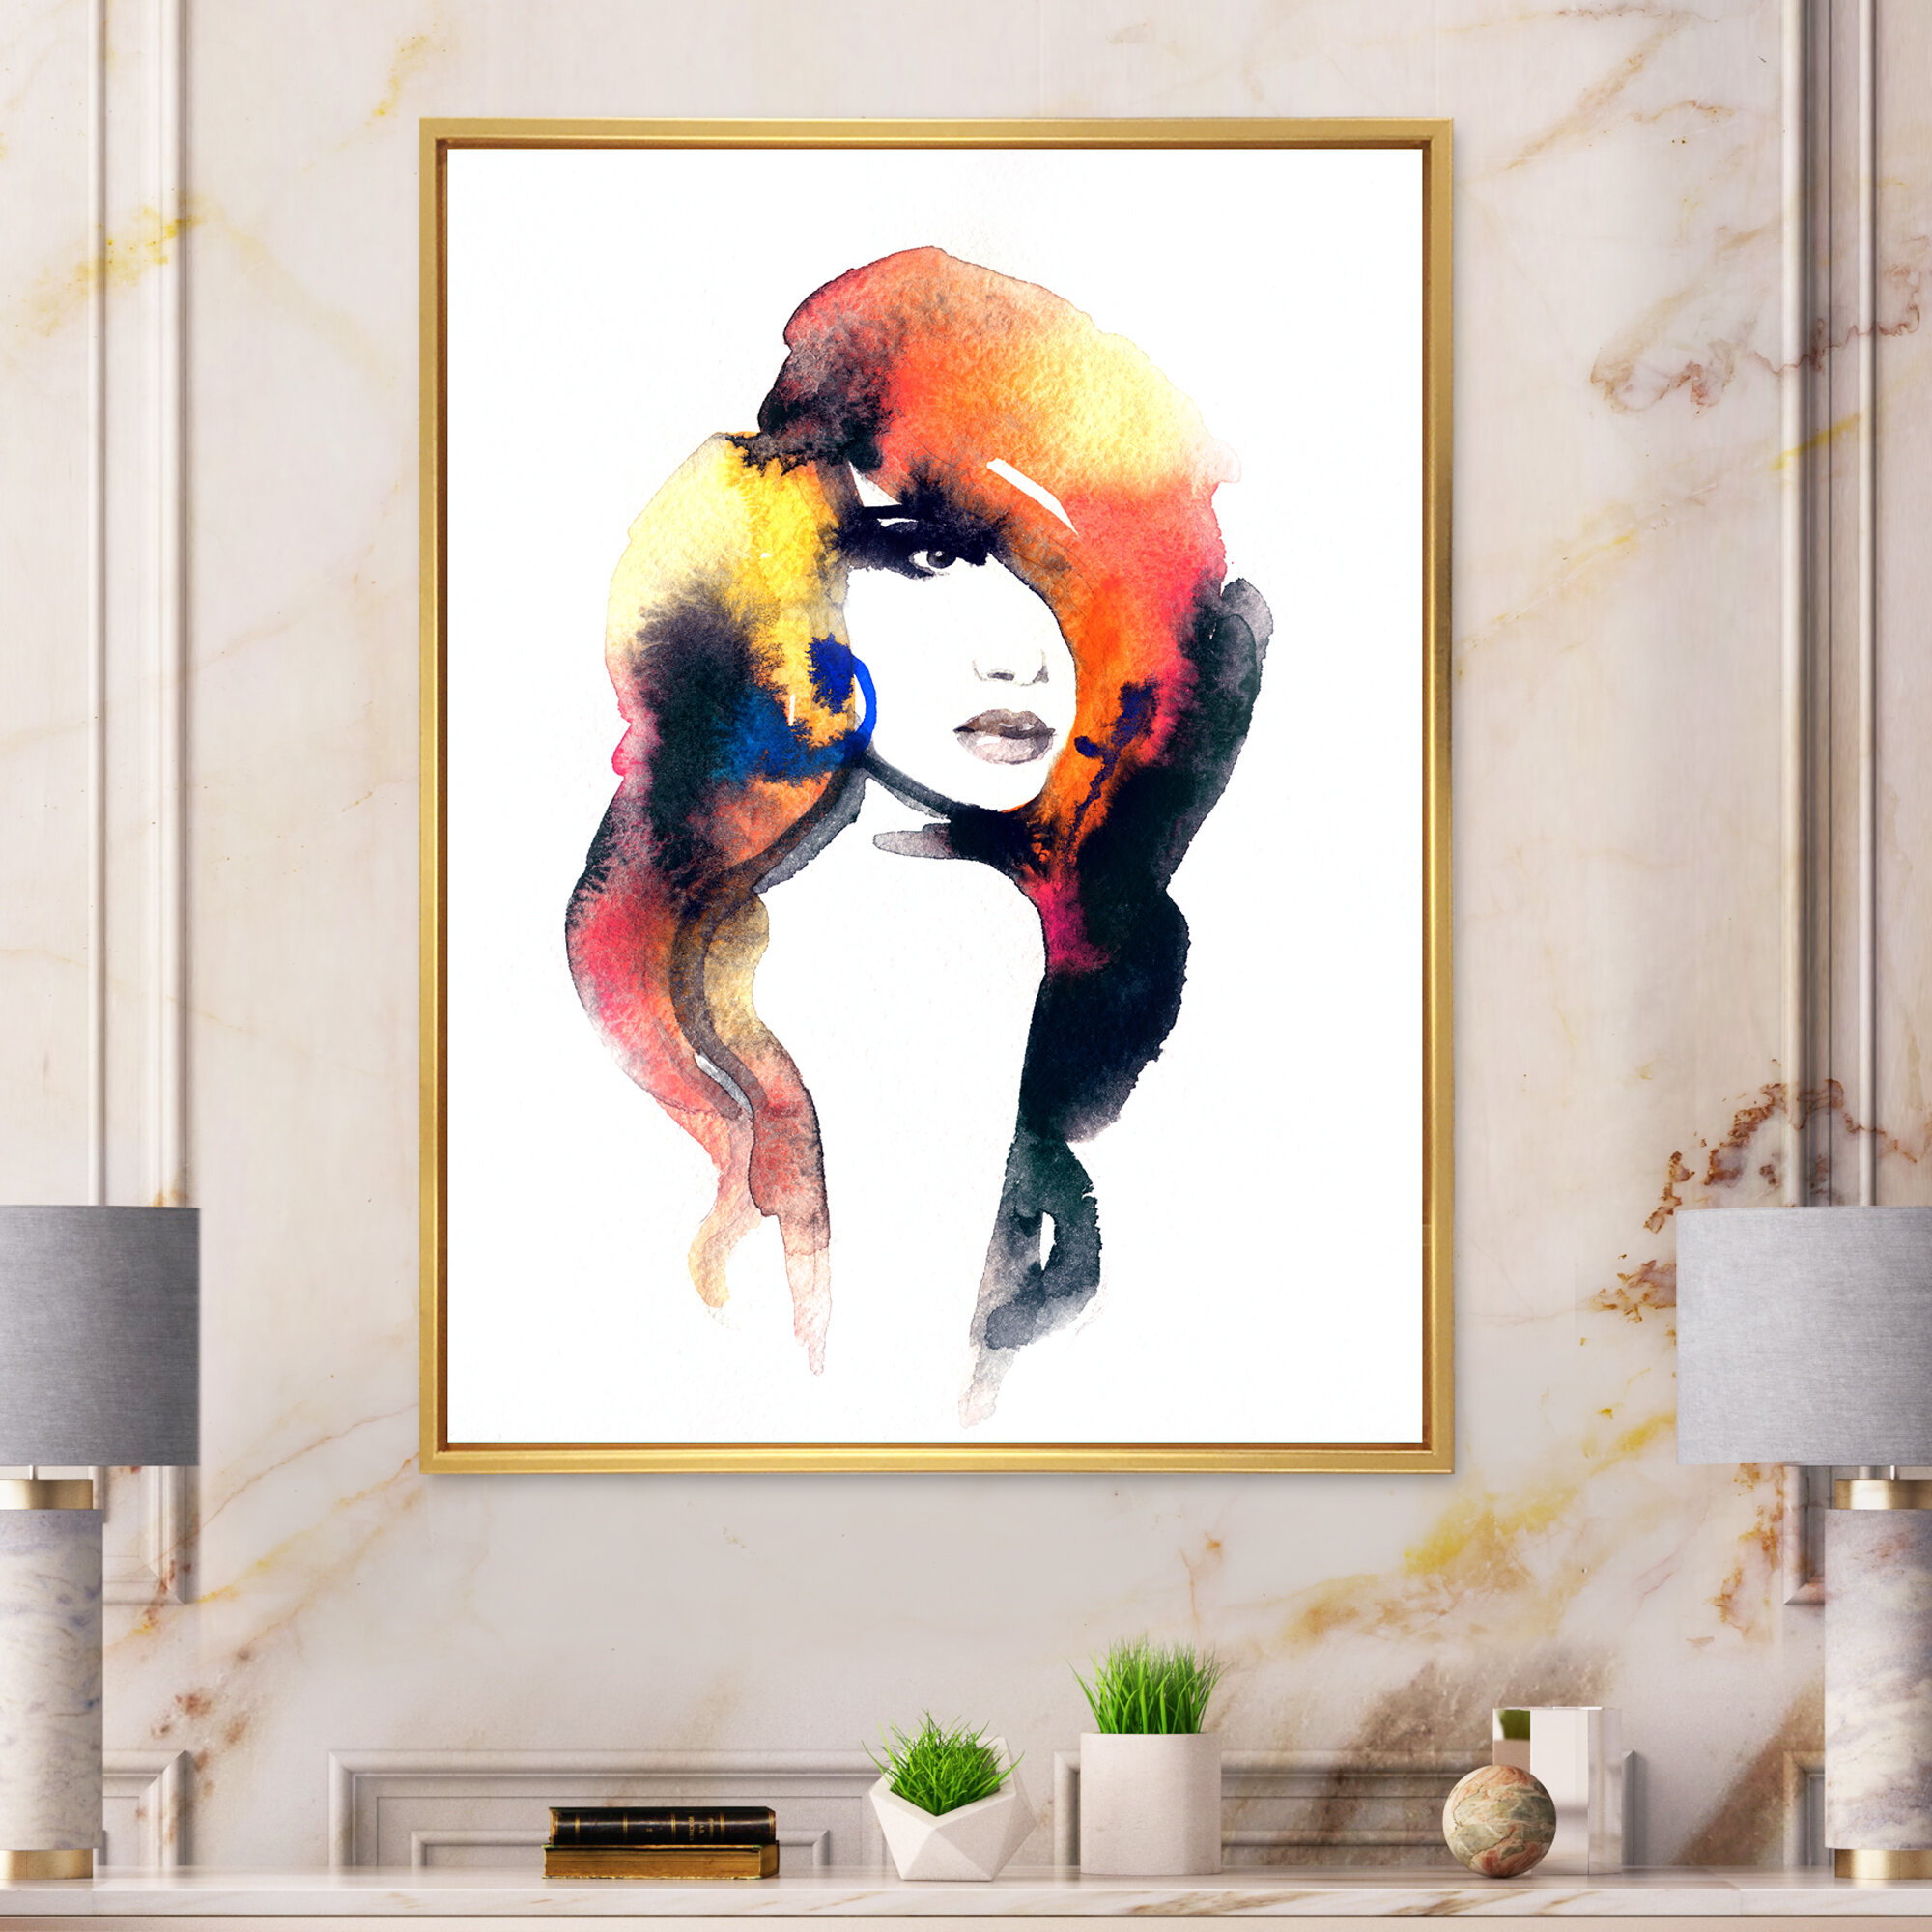 Bless international Portrait Of A Beautiful Woman With Vibrant Hair On Canvas  Painting Wayfair